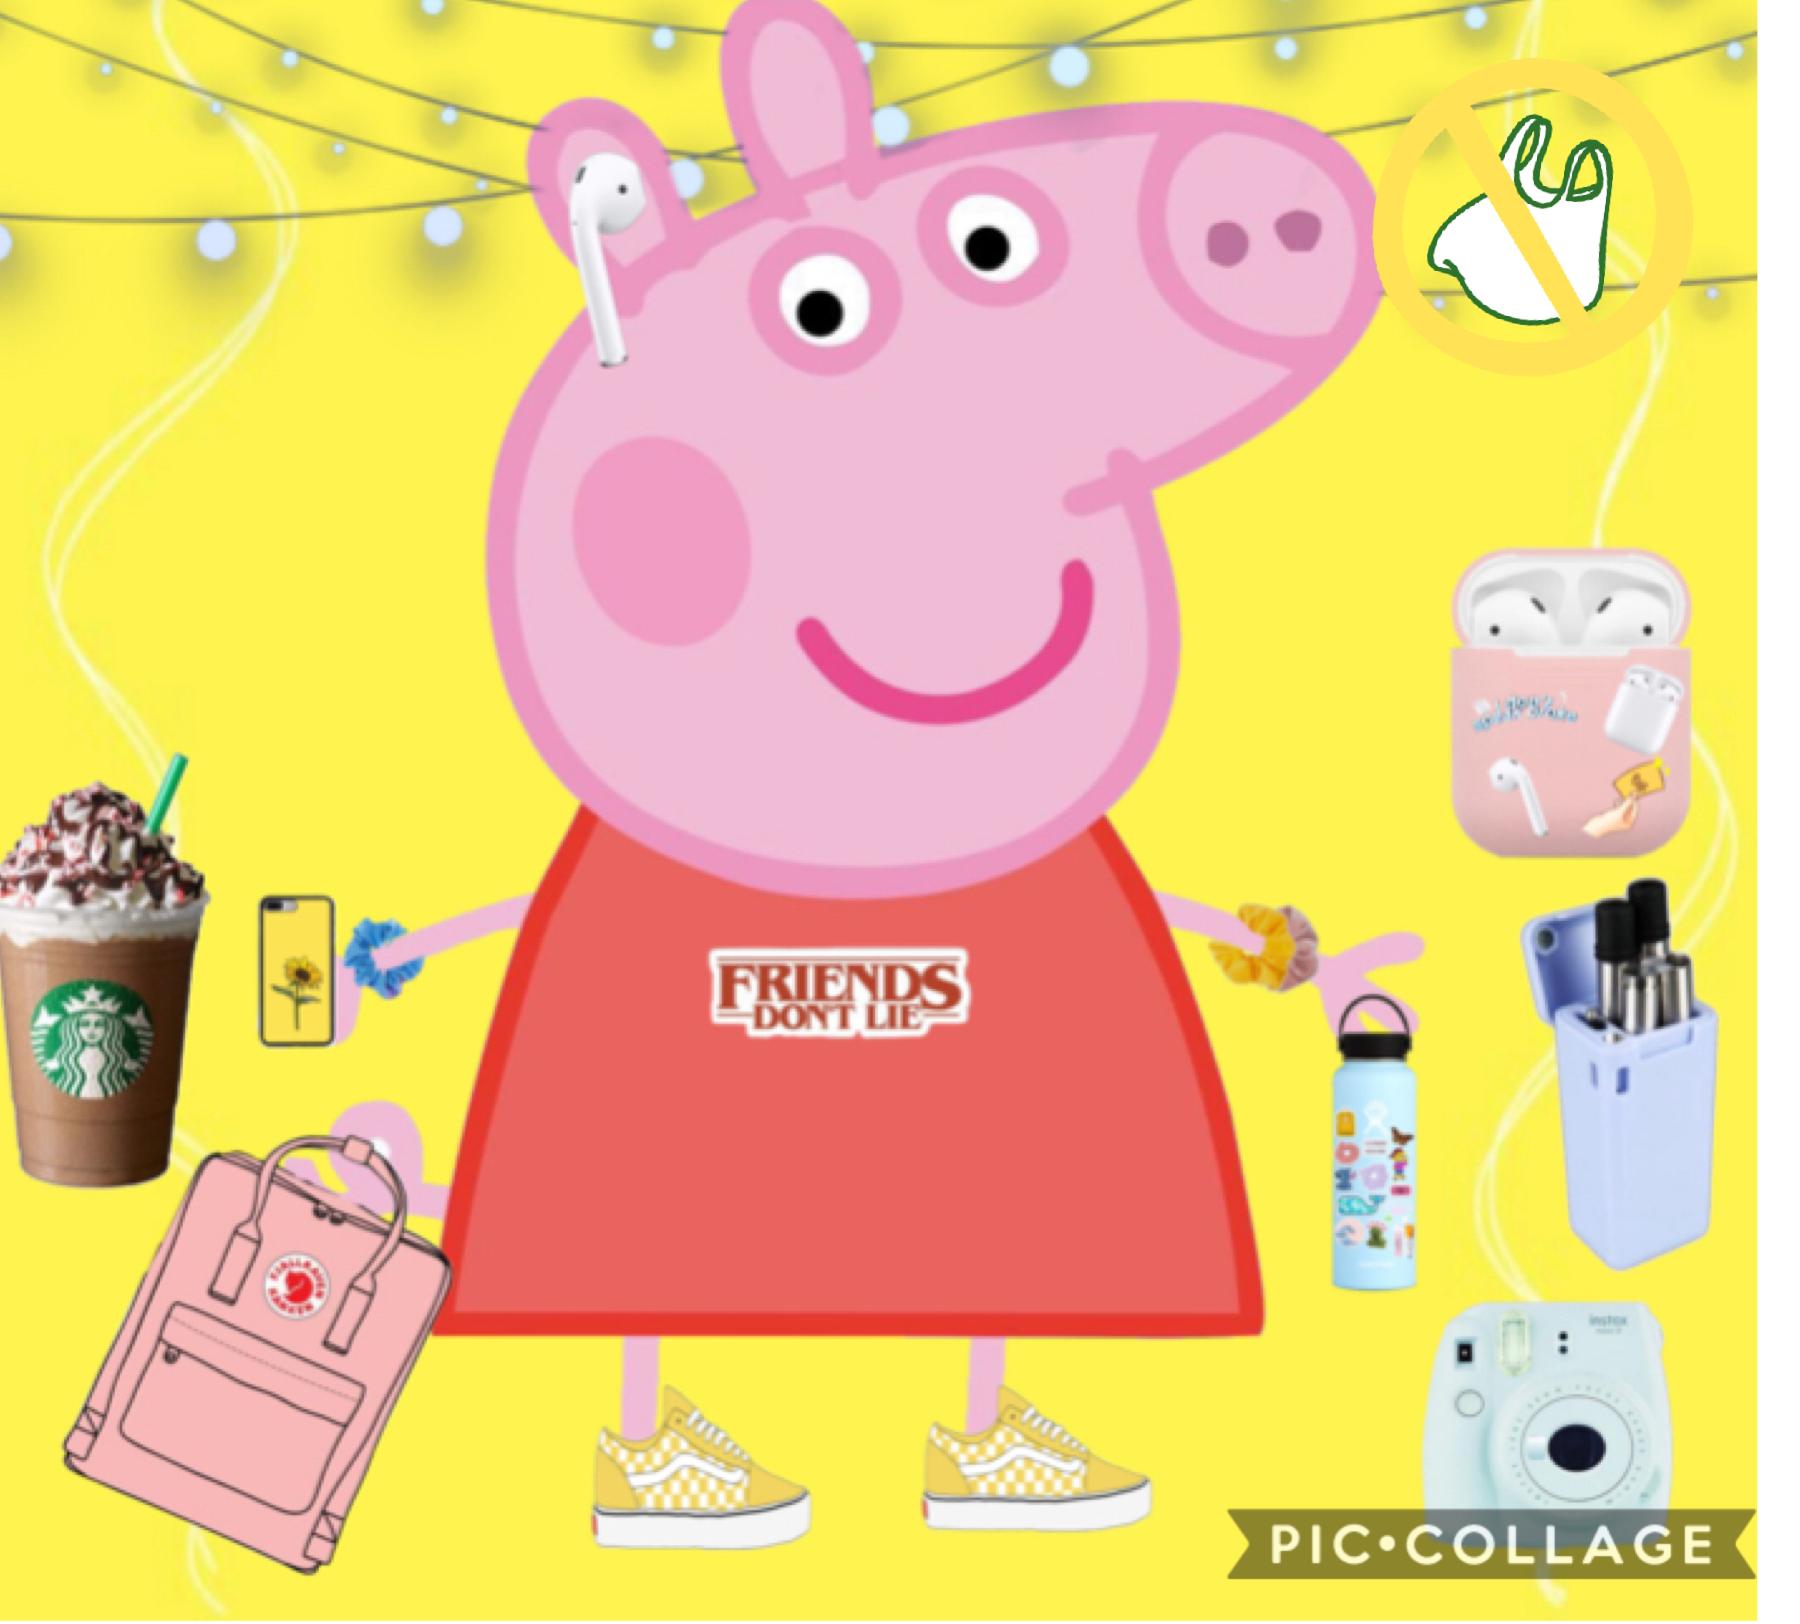 What has peppa done to herself